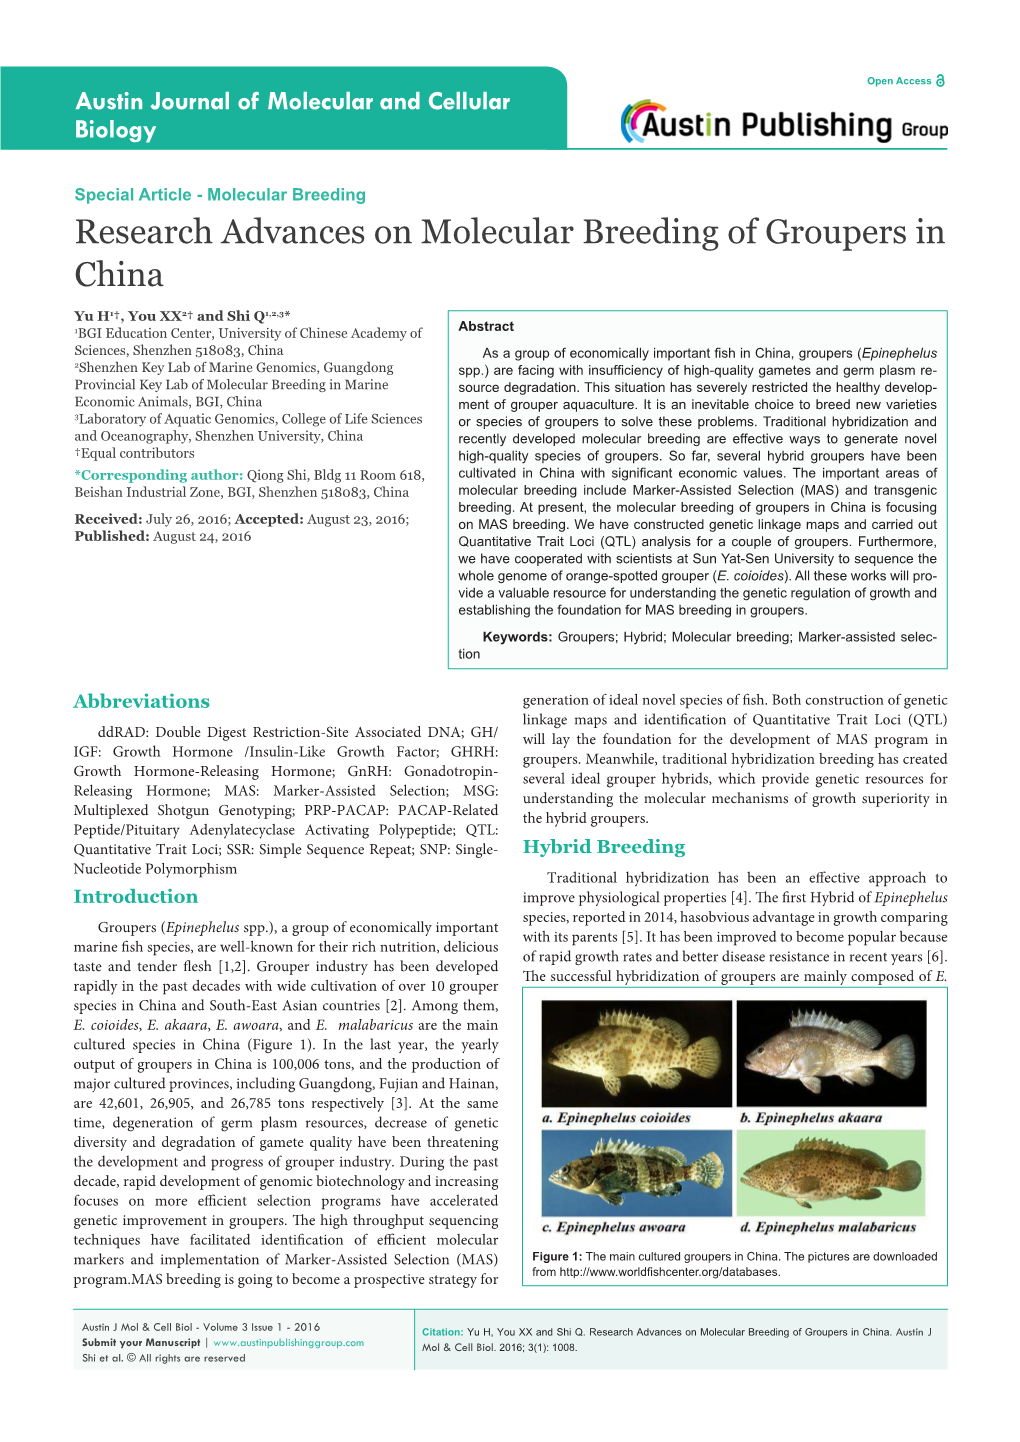 Research Advances on Molecular Breeding of Groupers in China